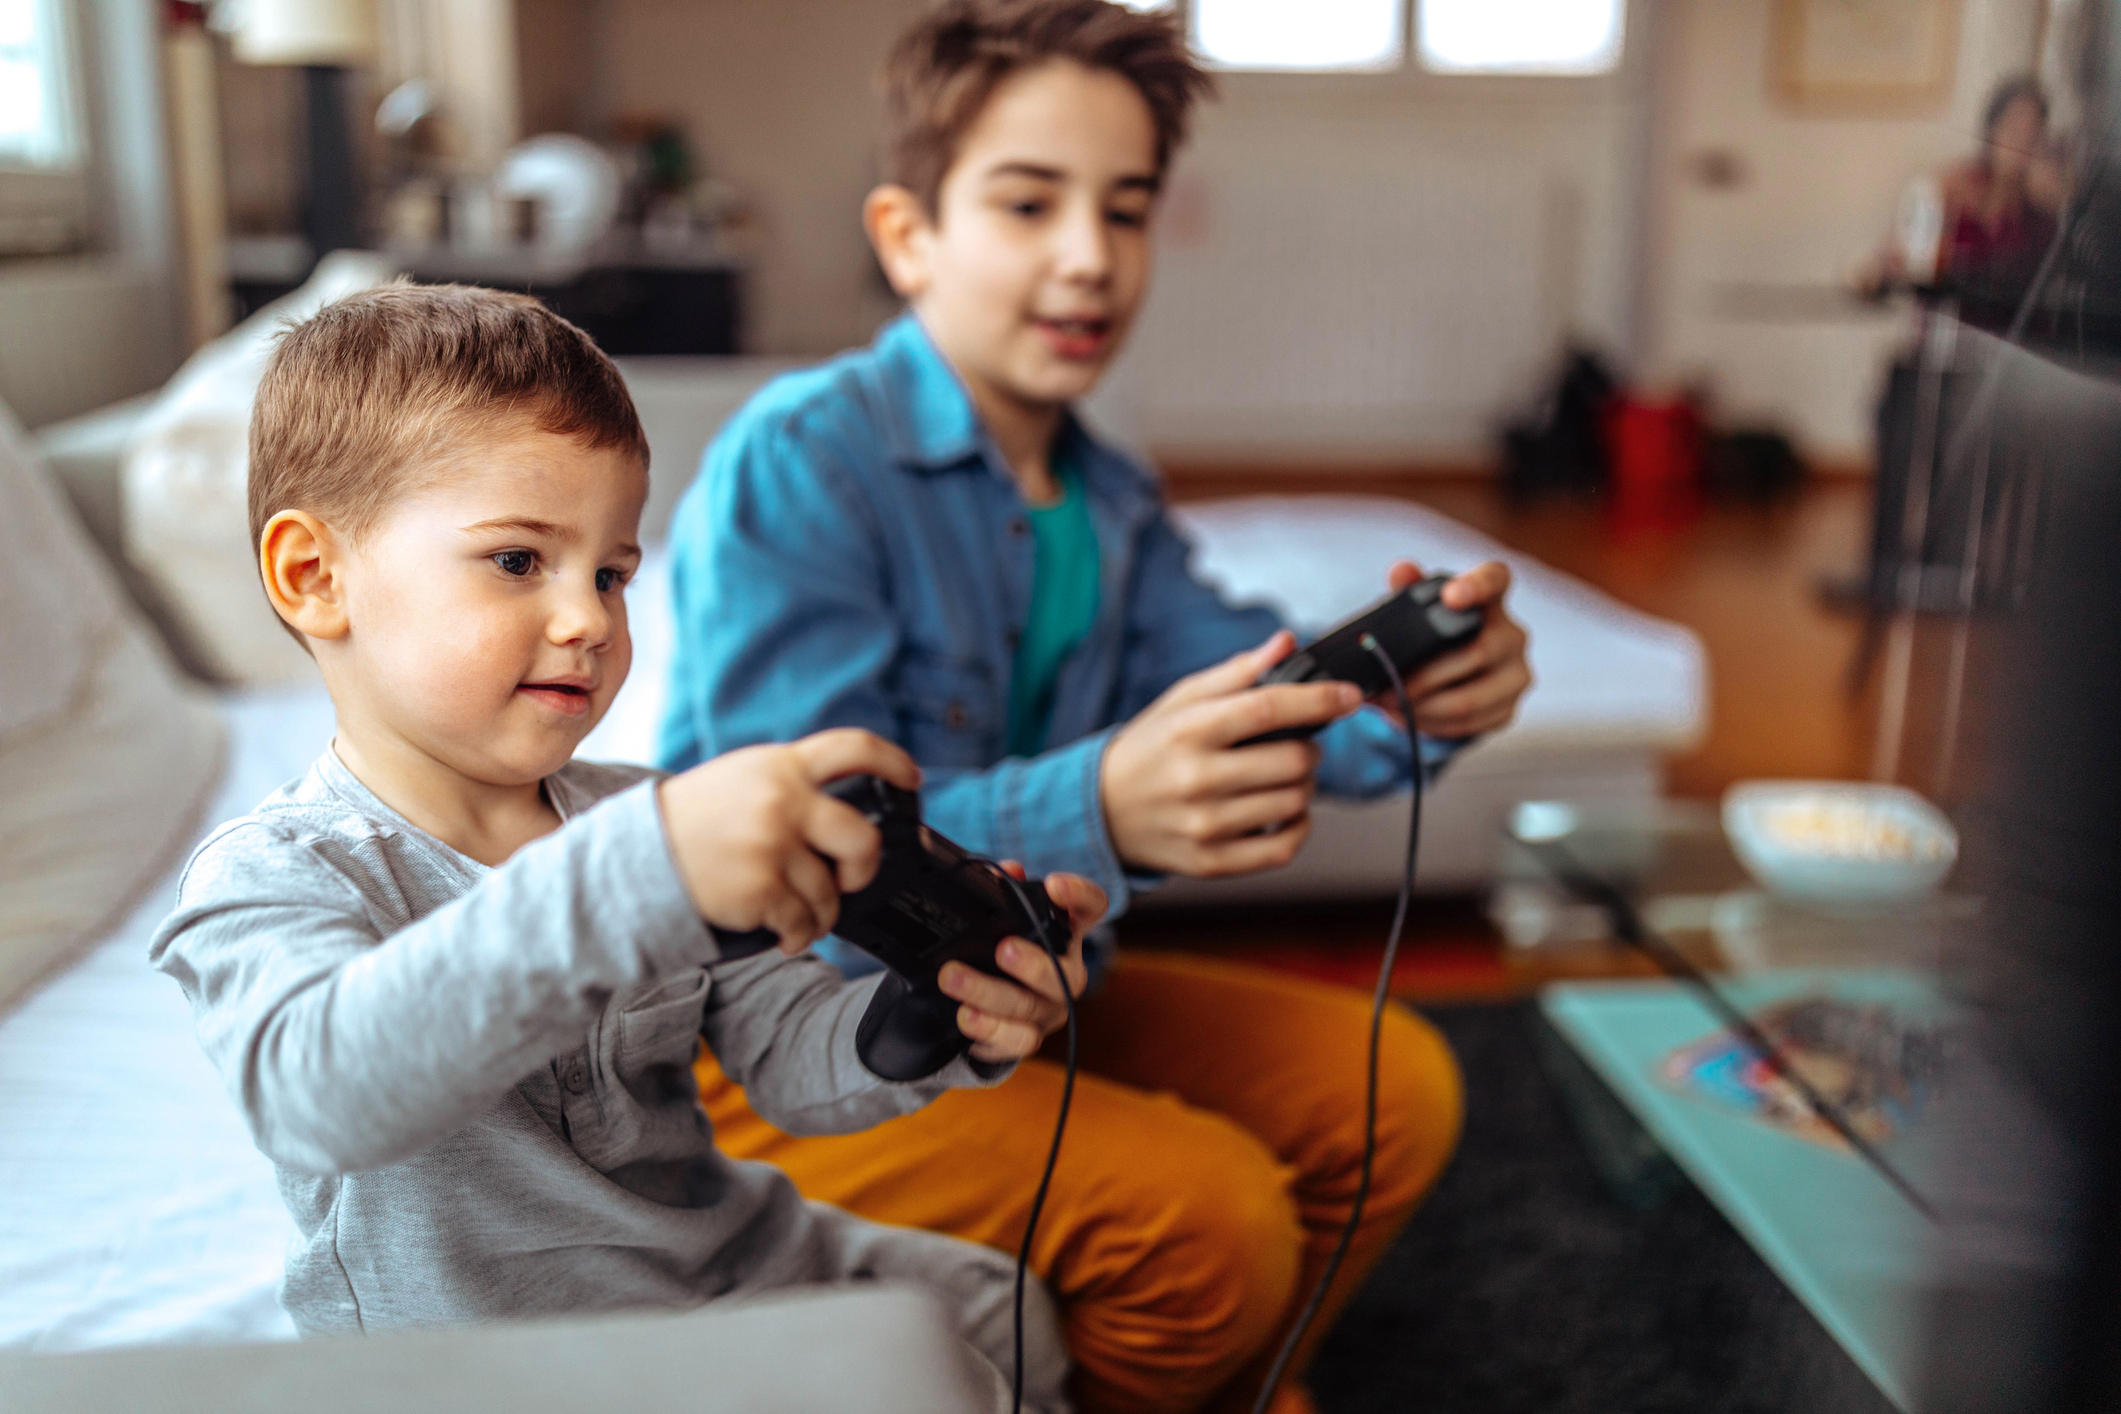 children playing with video games at home